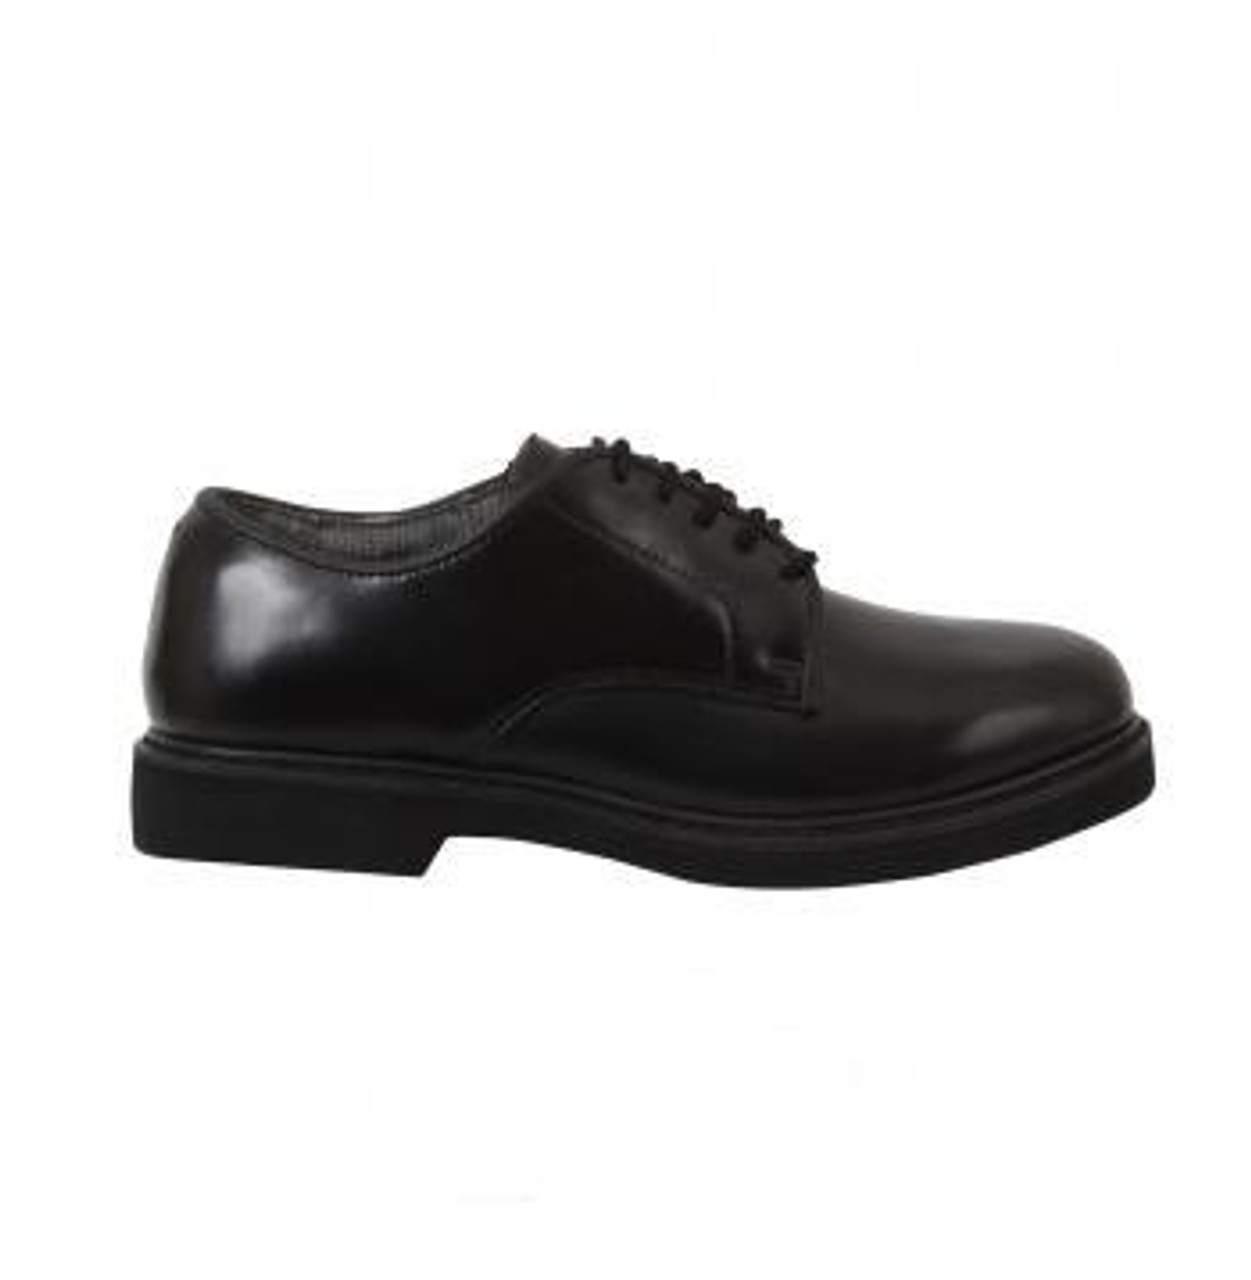 Military Uniform Oxford Leather Shoes from Hessen Tactical